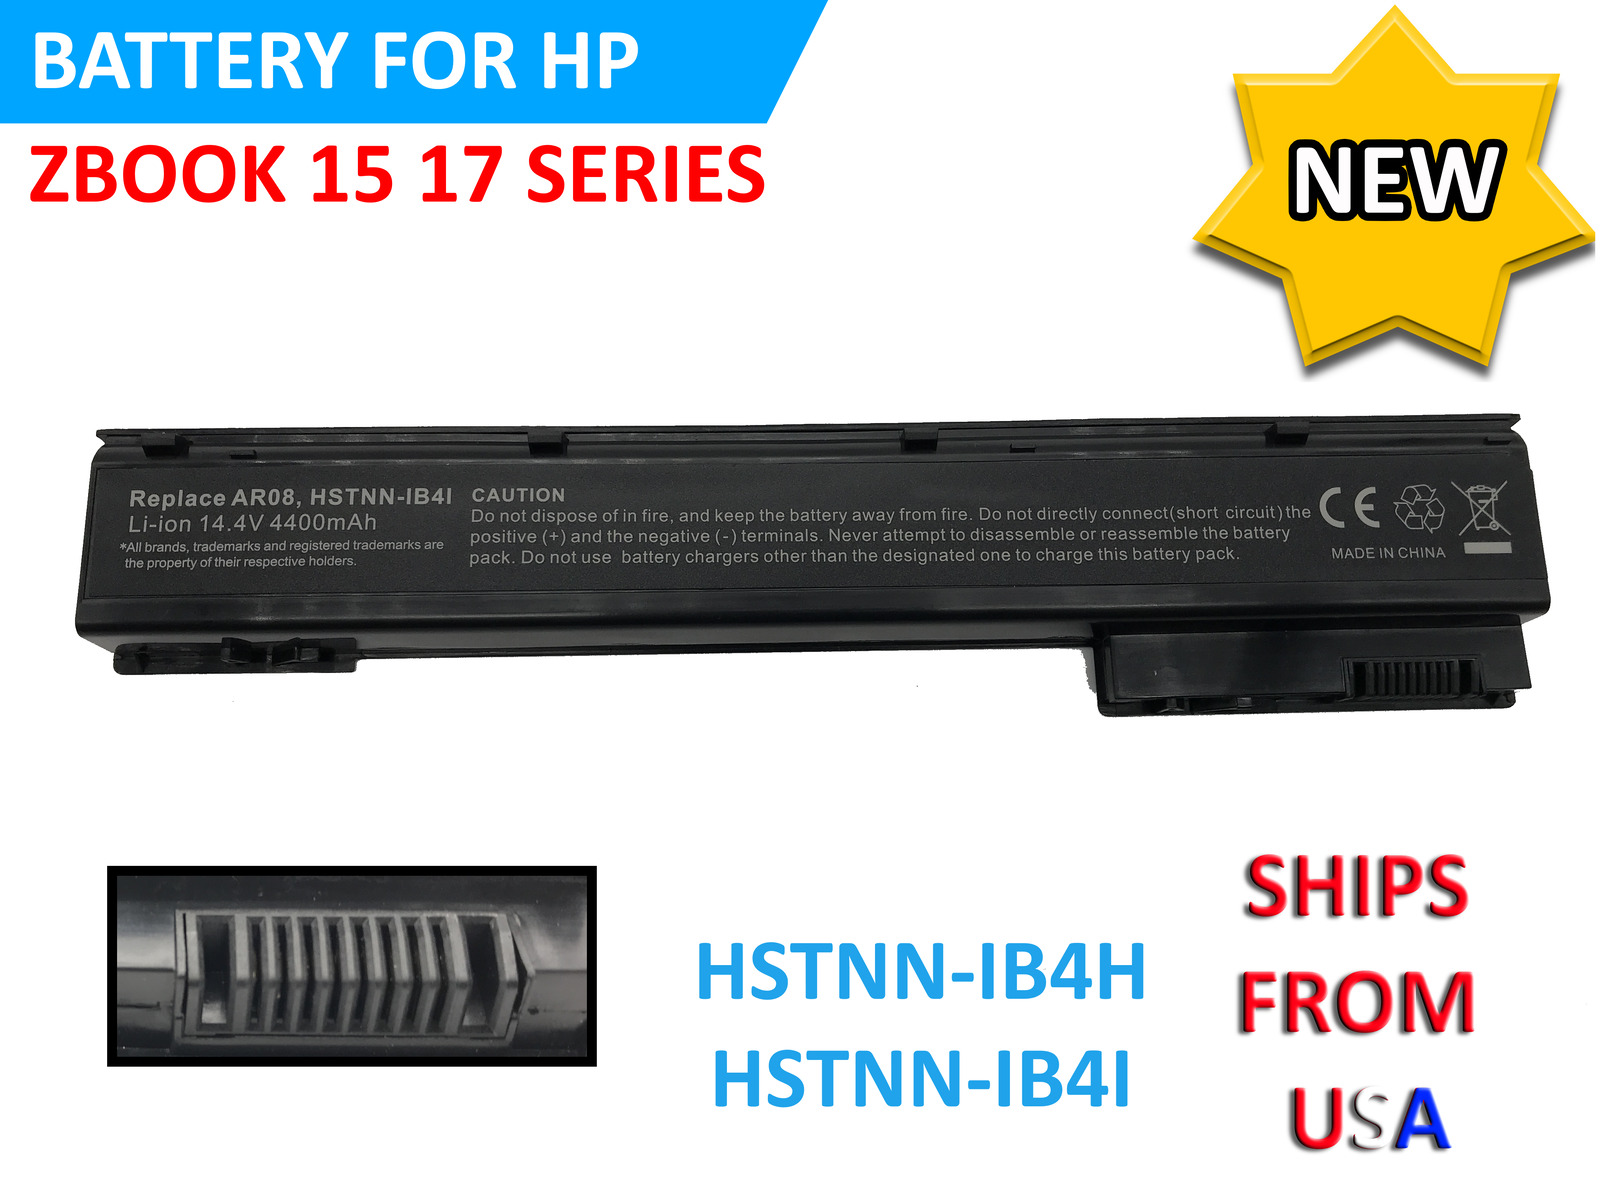 Replacement Laptop Battery For HP ZBook 15 17 14.4V 708455-001 707614-121